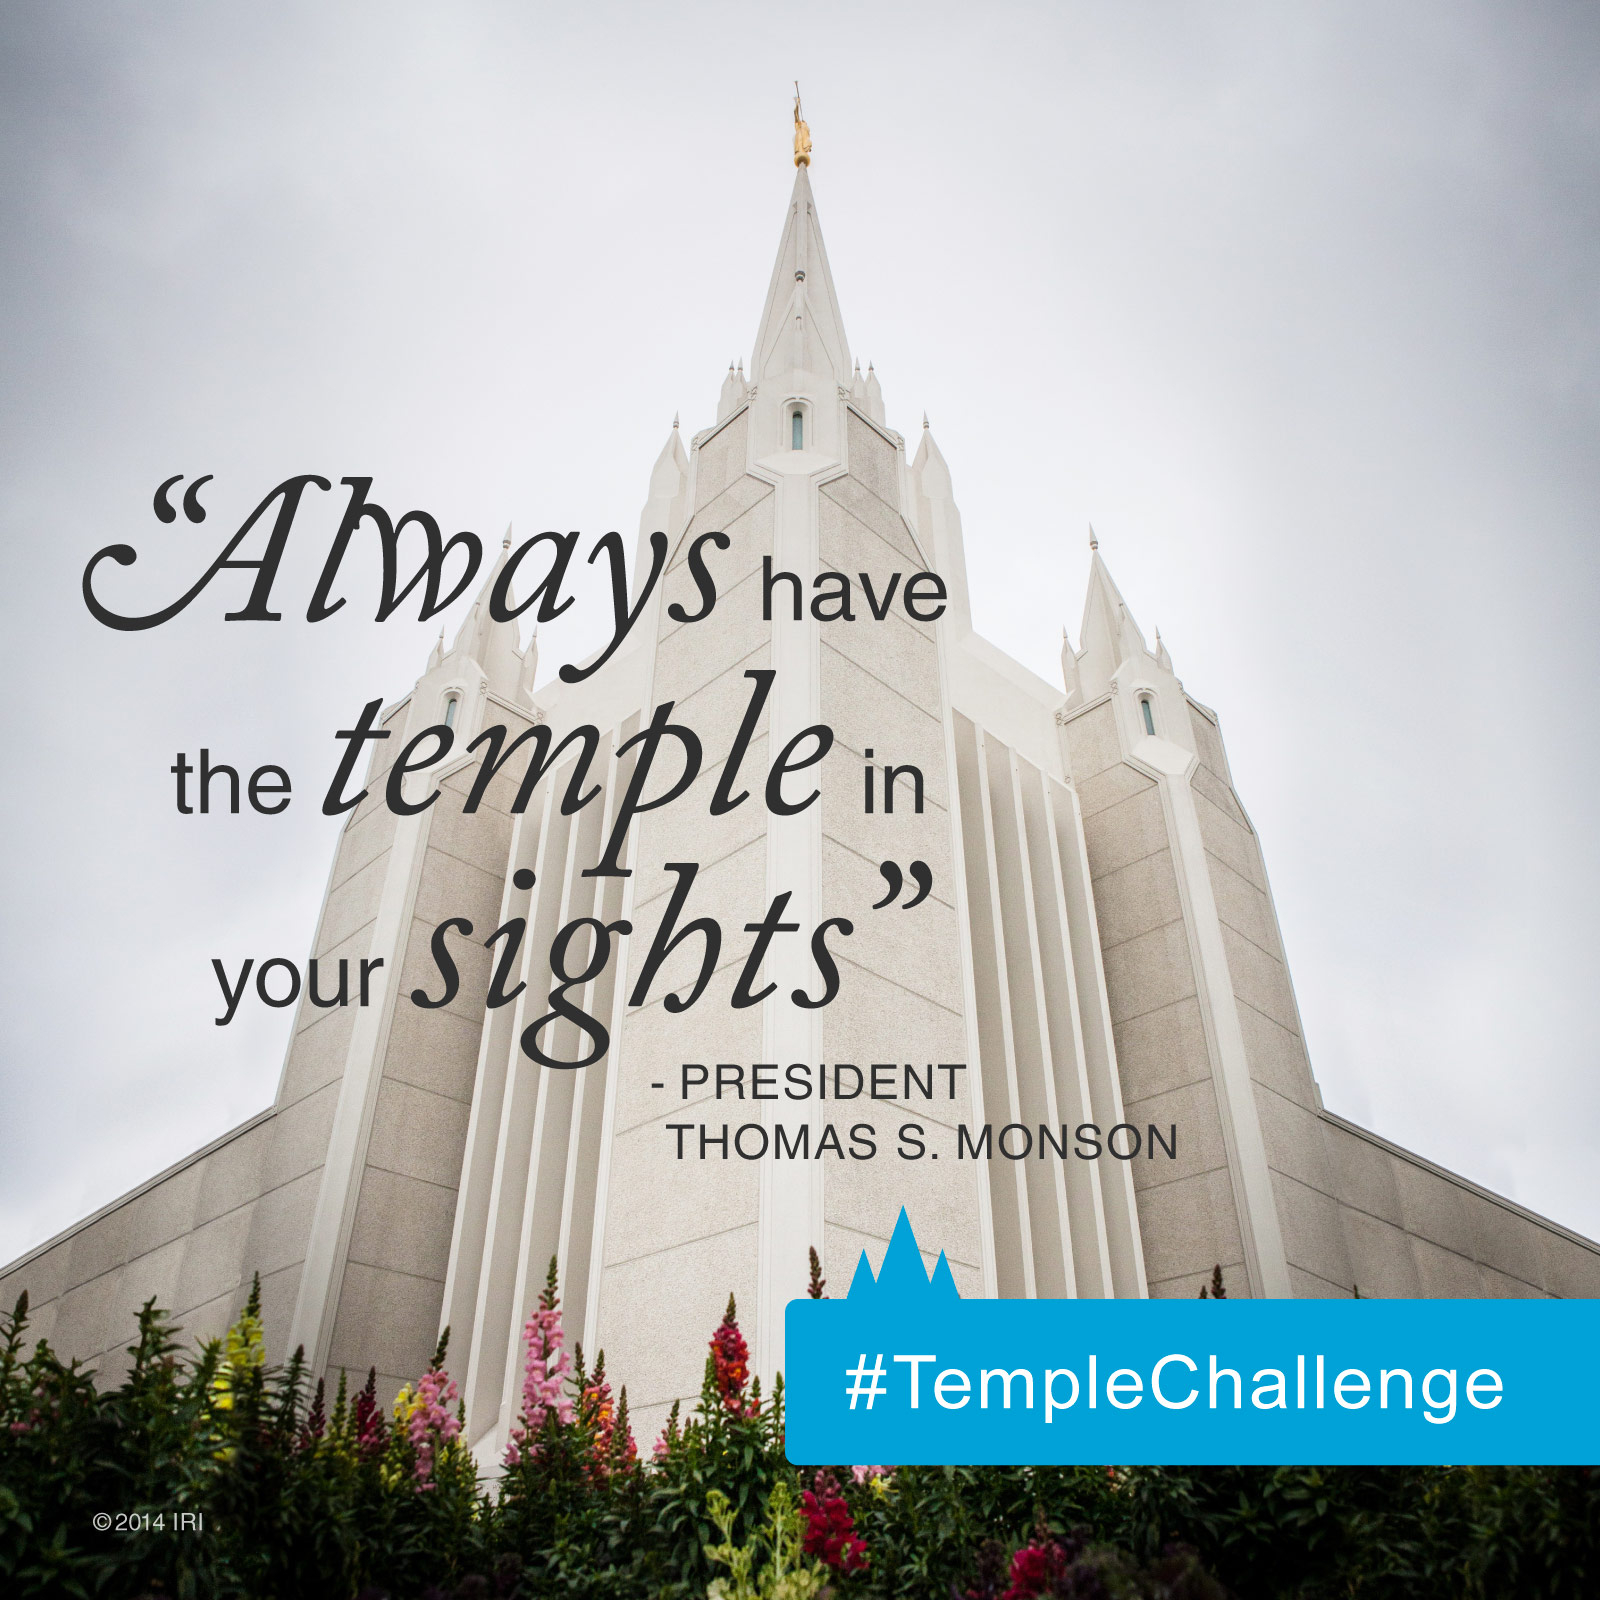 LDS Temples, safety and peace